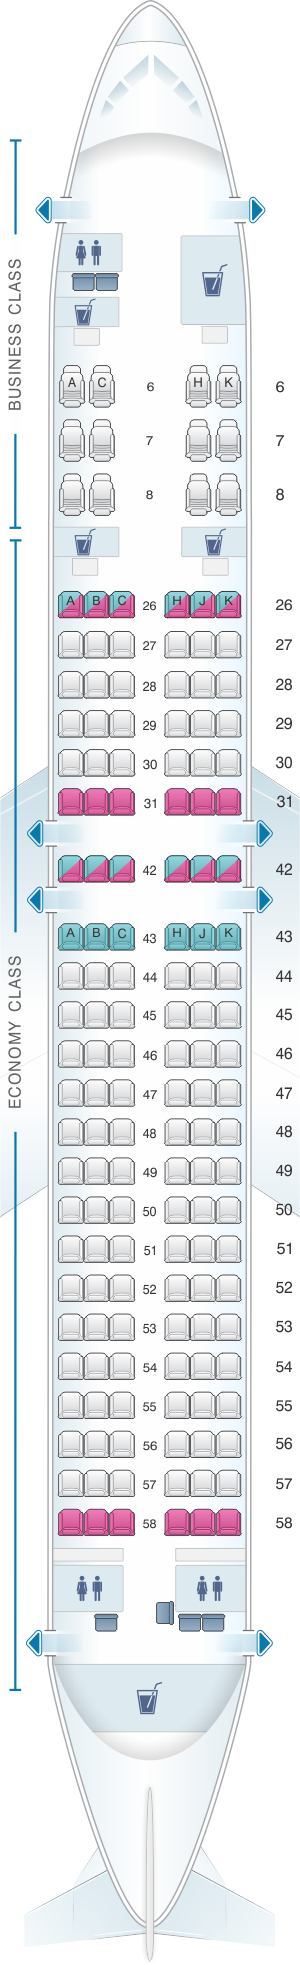 Seat map for Royal Brunei Airlines Airbus A320